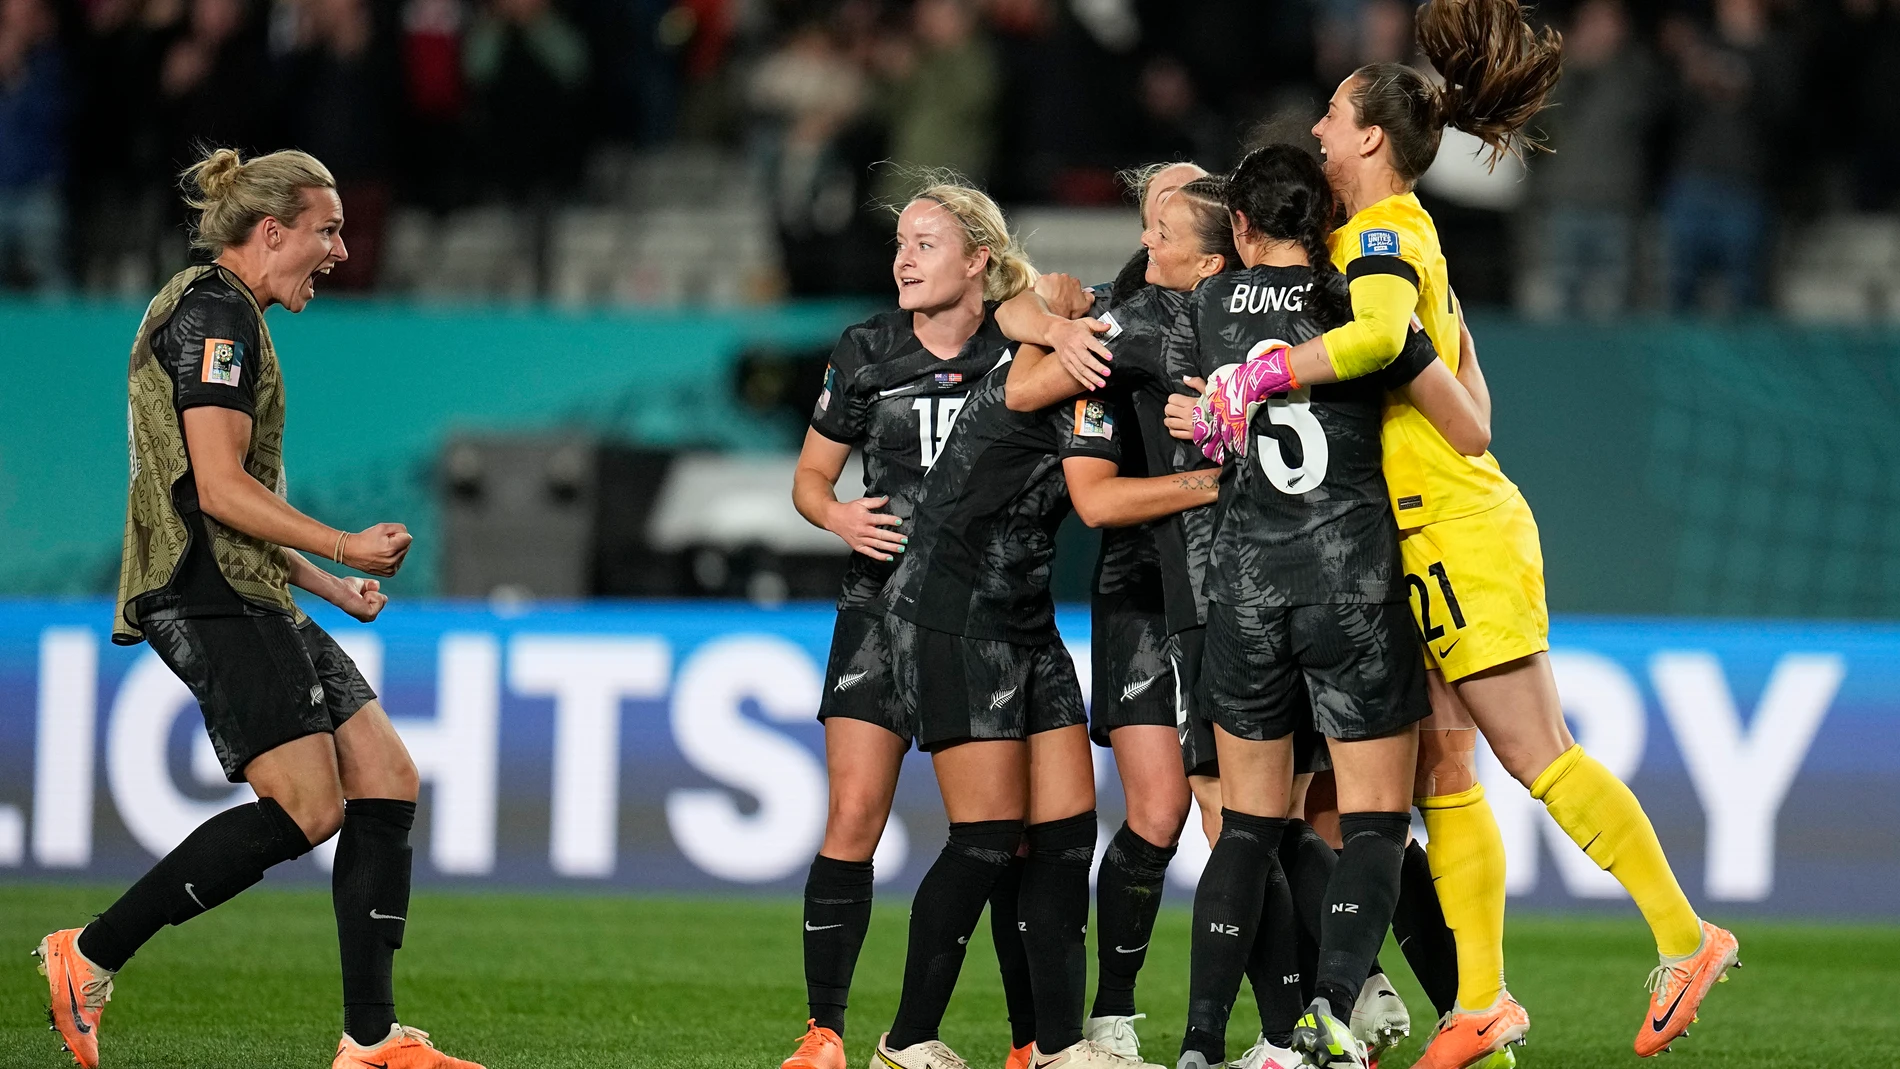 New Zealand's players celebrate at the end of the Women's World Cup soccer match between New Zealand and Norway in Auckland, New Zealand, Thursday, July 20, 2023. (AP Photo/Abbie Parr)